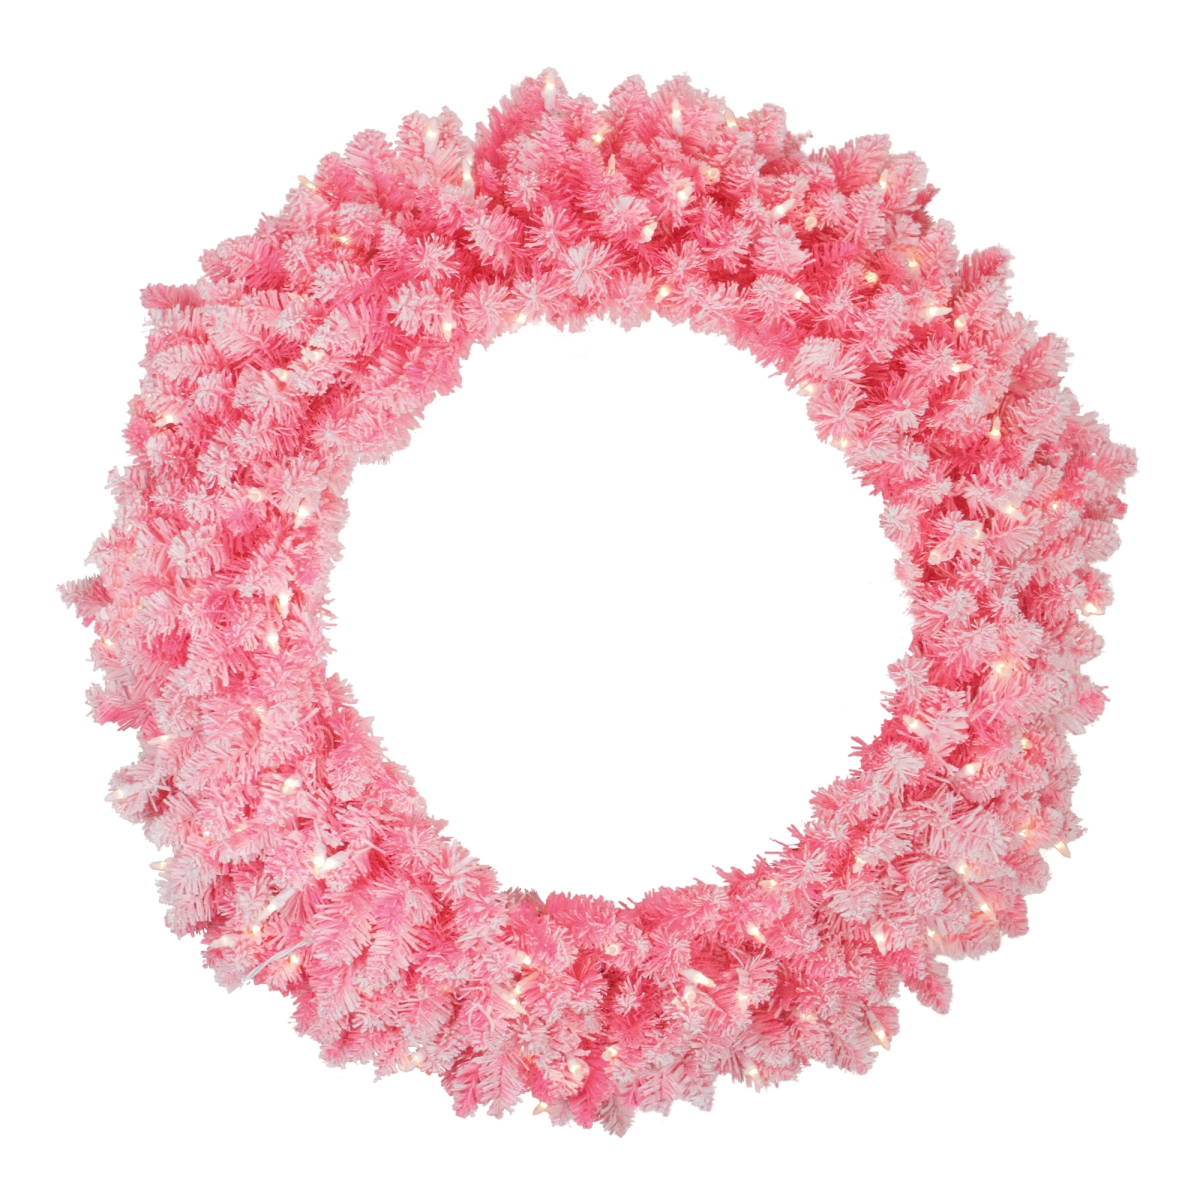 32915354 Pre-lit Flocked Pink Artificial Christmas Wreath - 36 In. Clear Lights